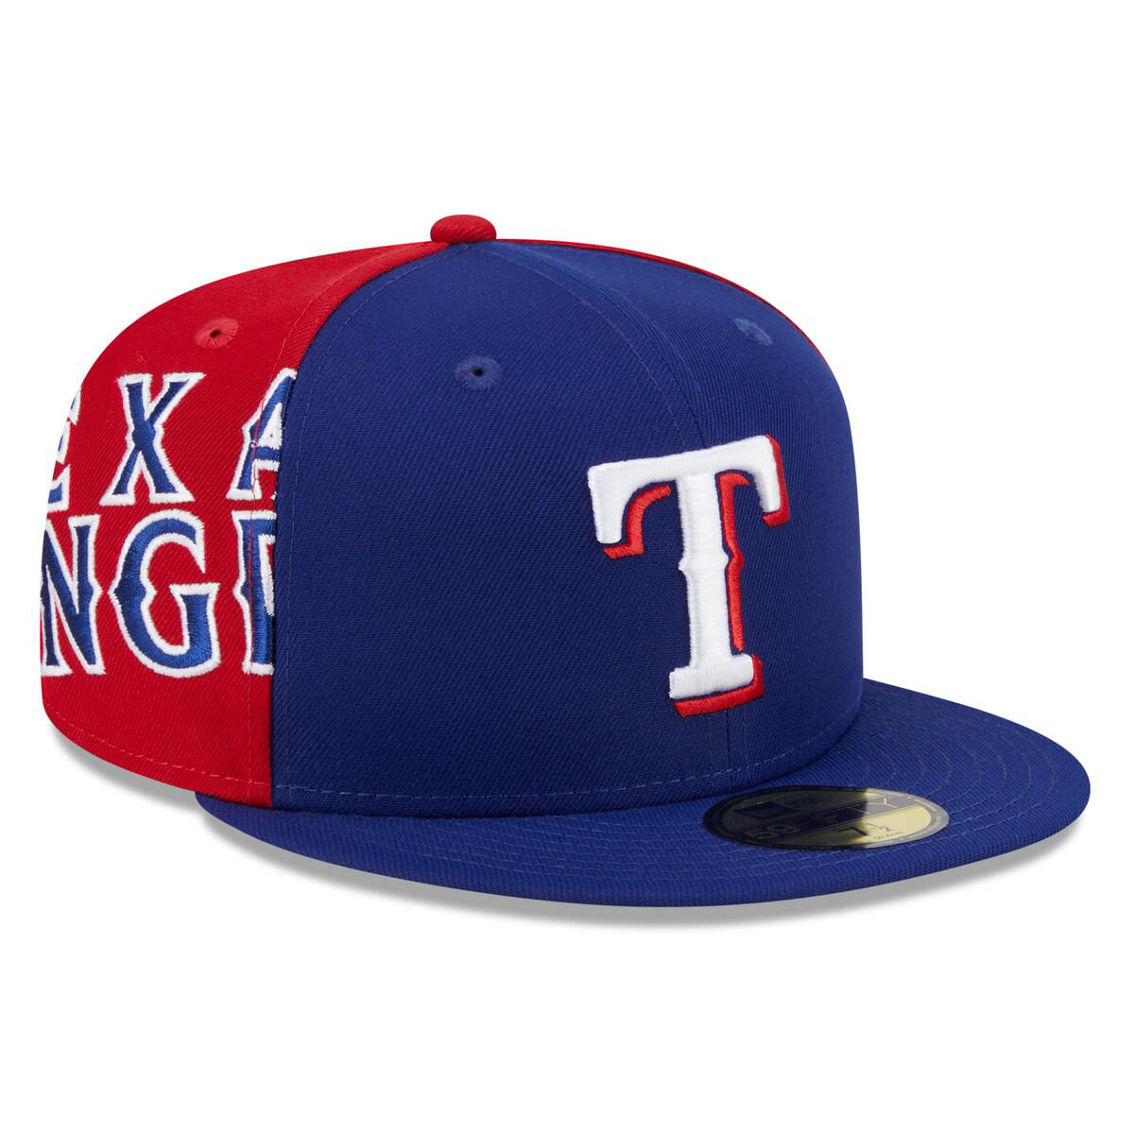 New Era Men's Royal/Red Texas Rangers Gameday Sideswipe 59FIFTY Fitted Hat - Image 2 of 4